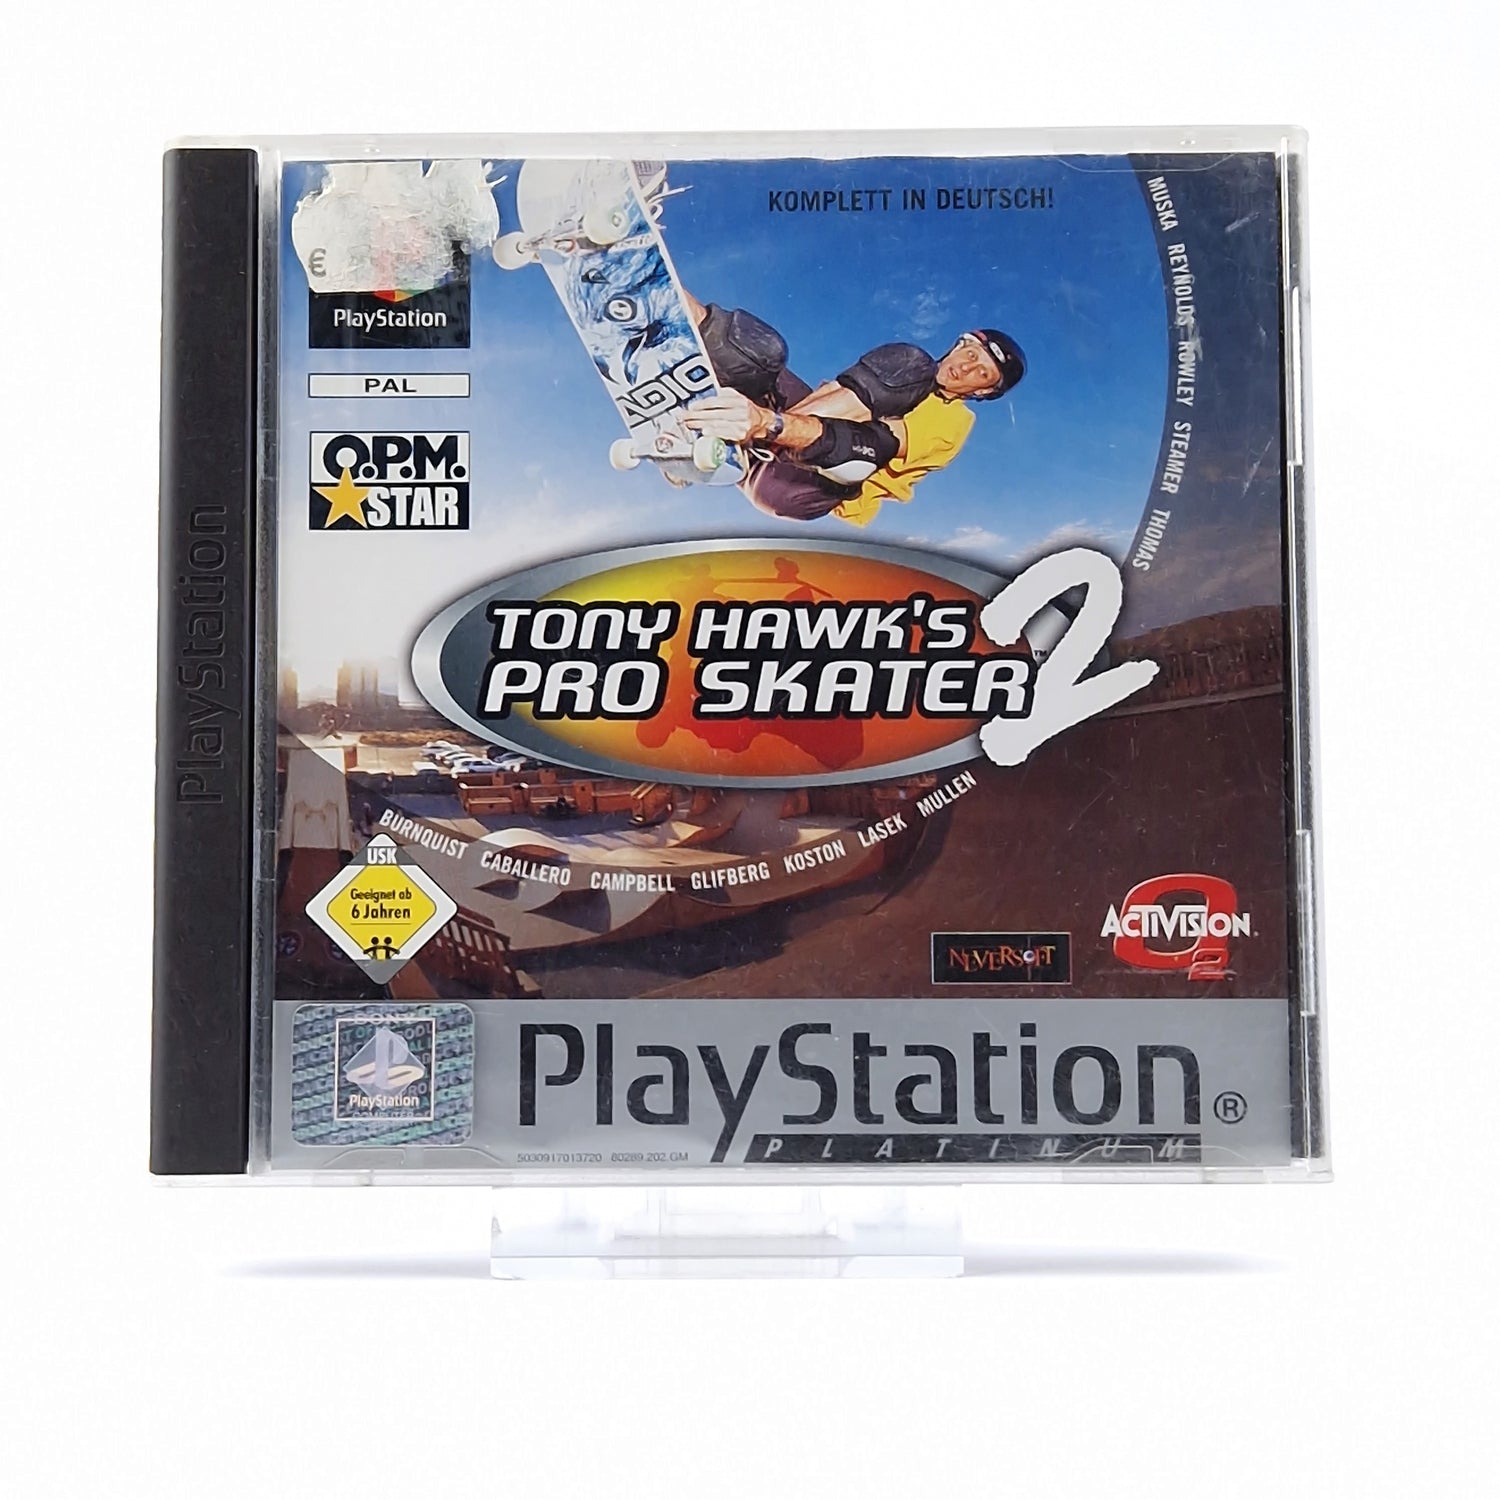 Sony Playstation 1 Spiel : Tony Hawk´s Pro Skater 2 - OVP Anleitung PAL PS1 PSX